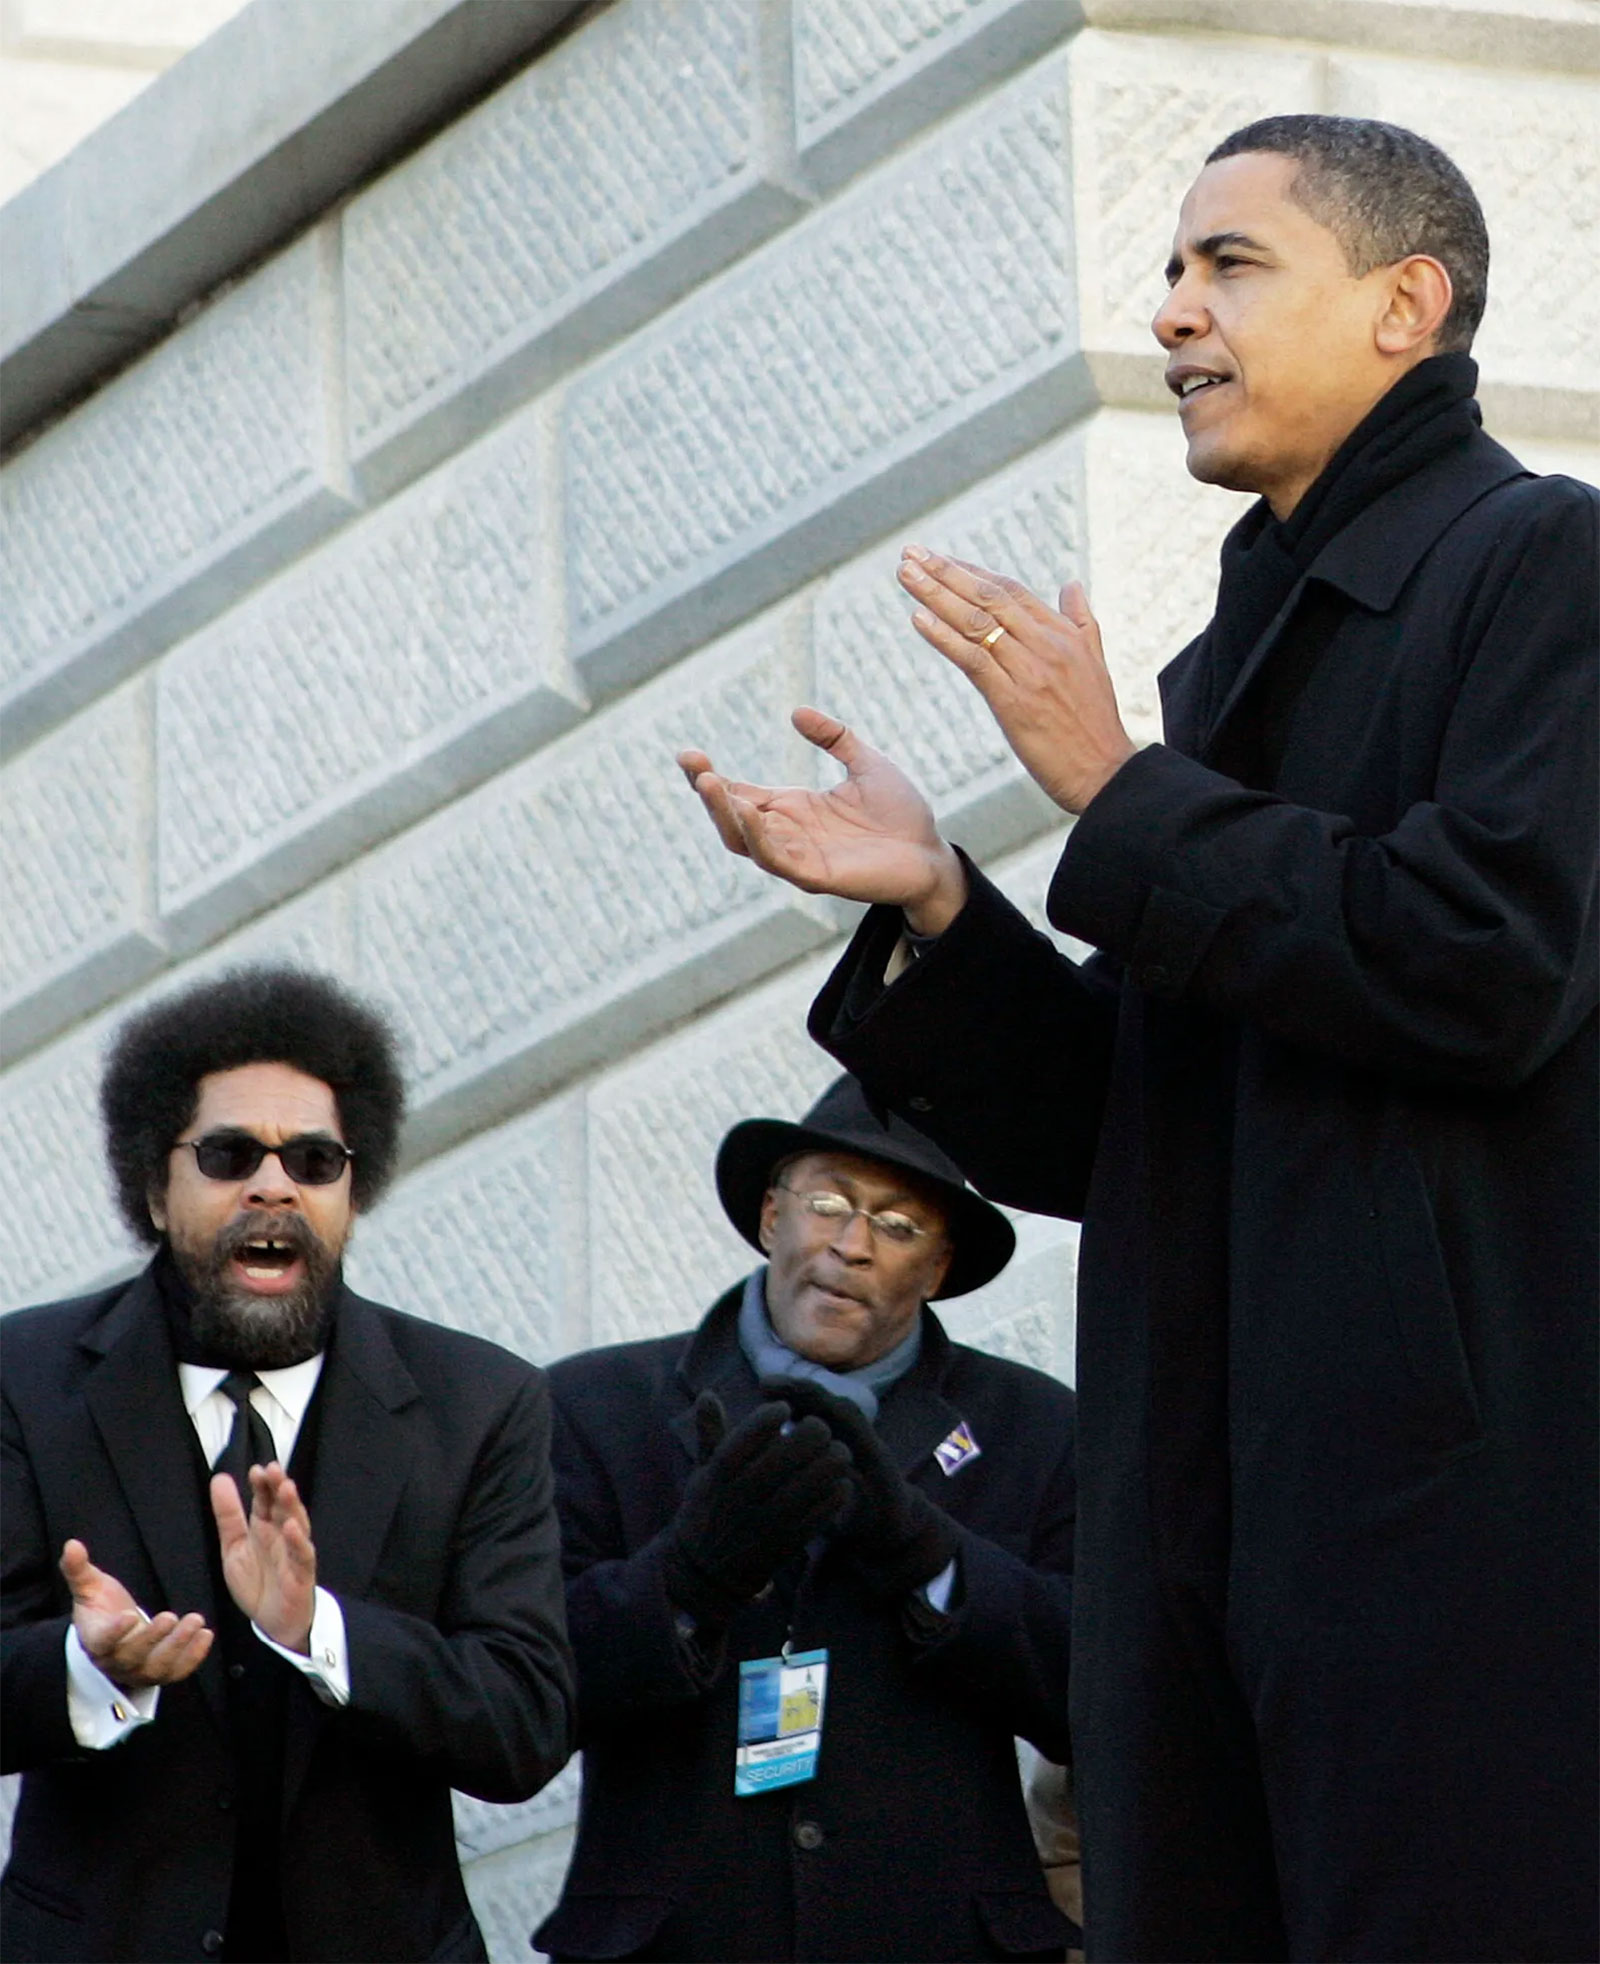 January 21, 2008: Applauding Barack Obama at a Martin Luther King Jr. Day rally in Columbia, South Carolina.